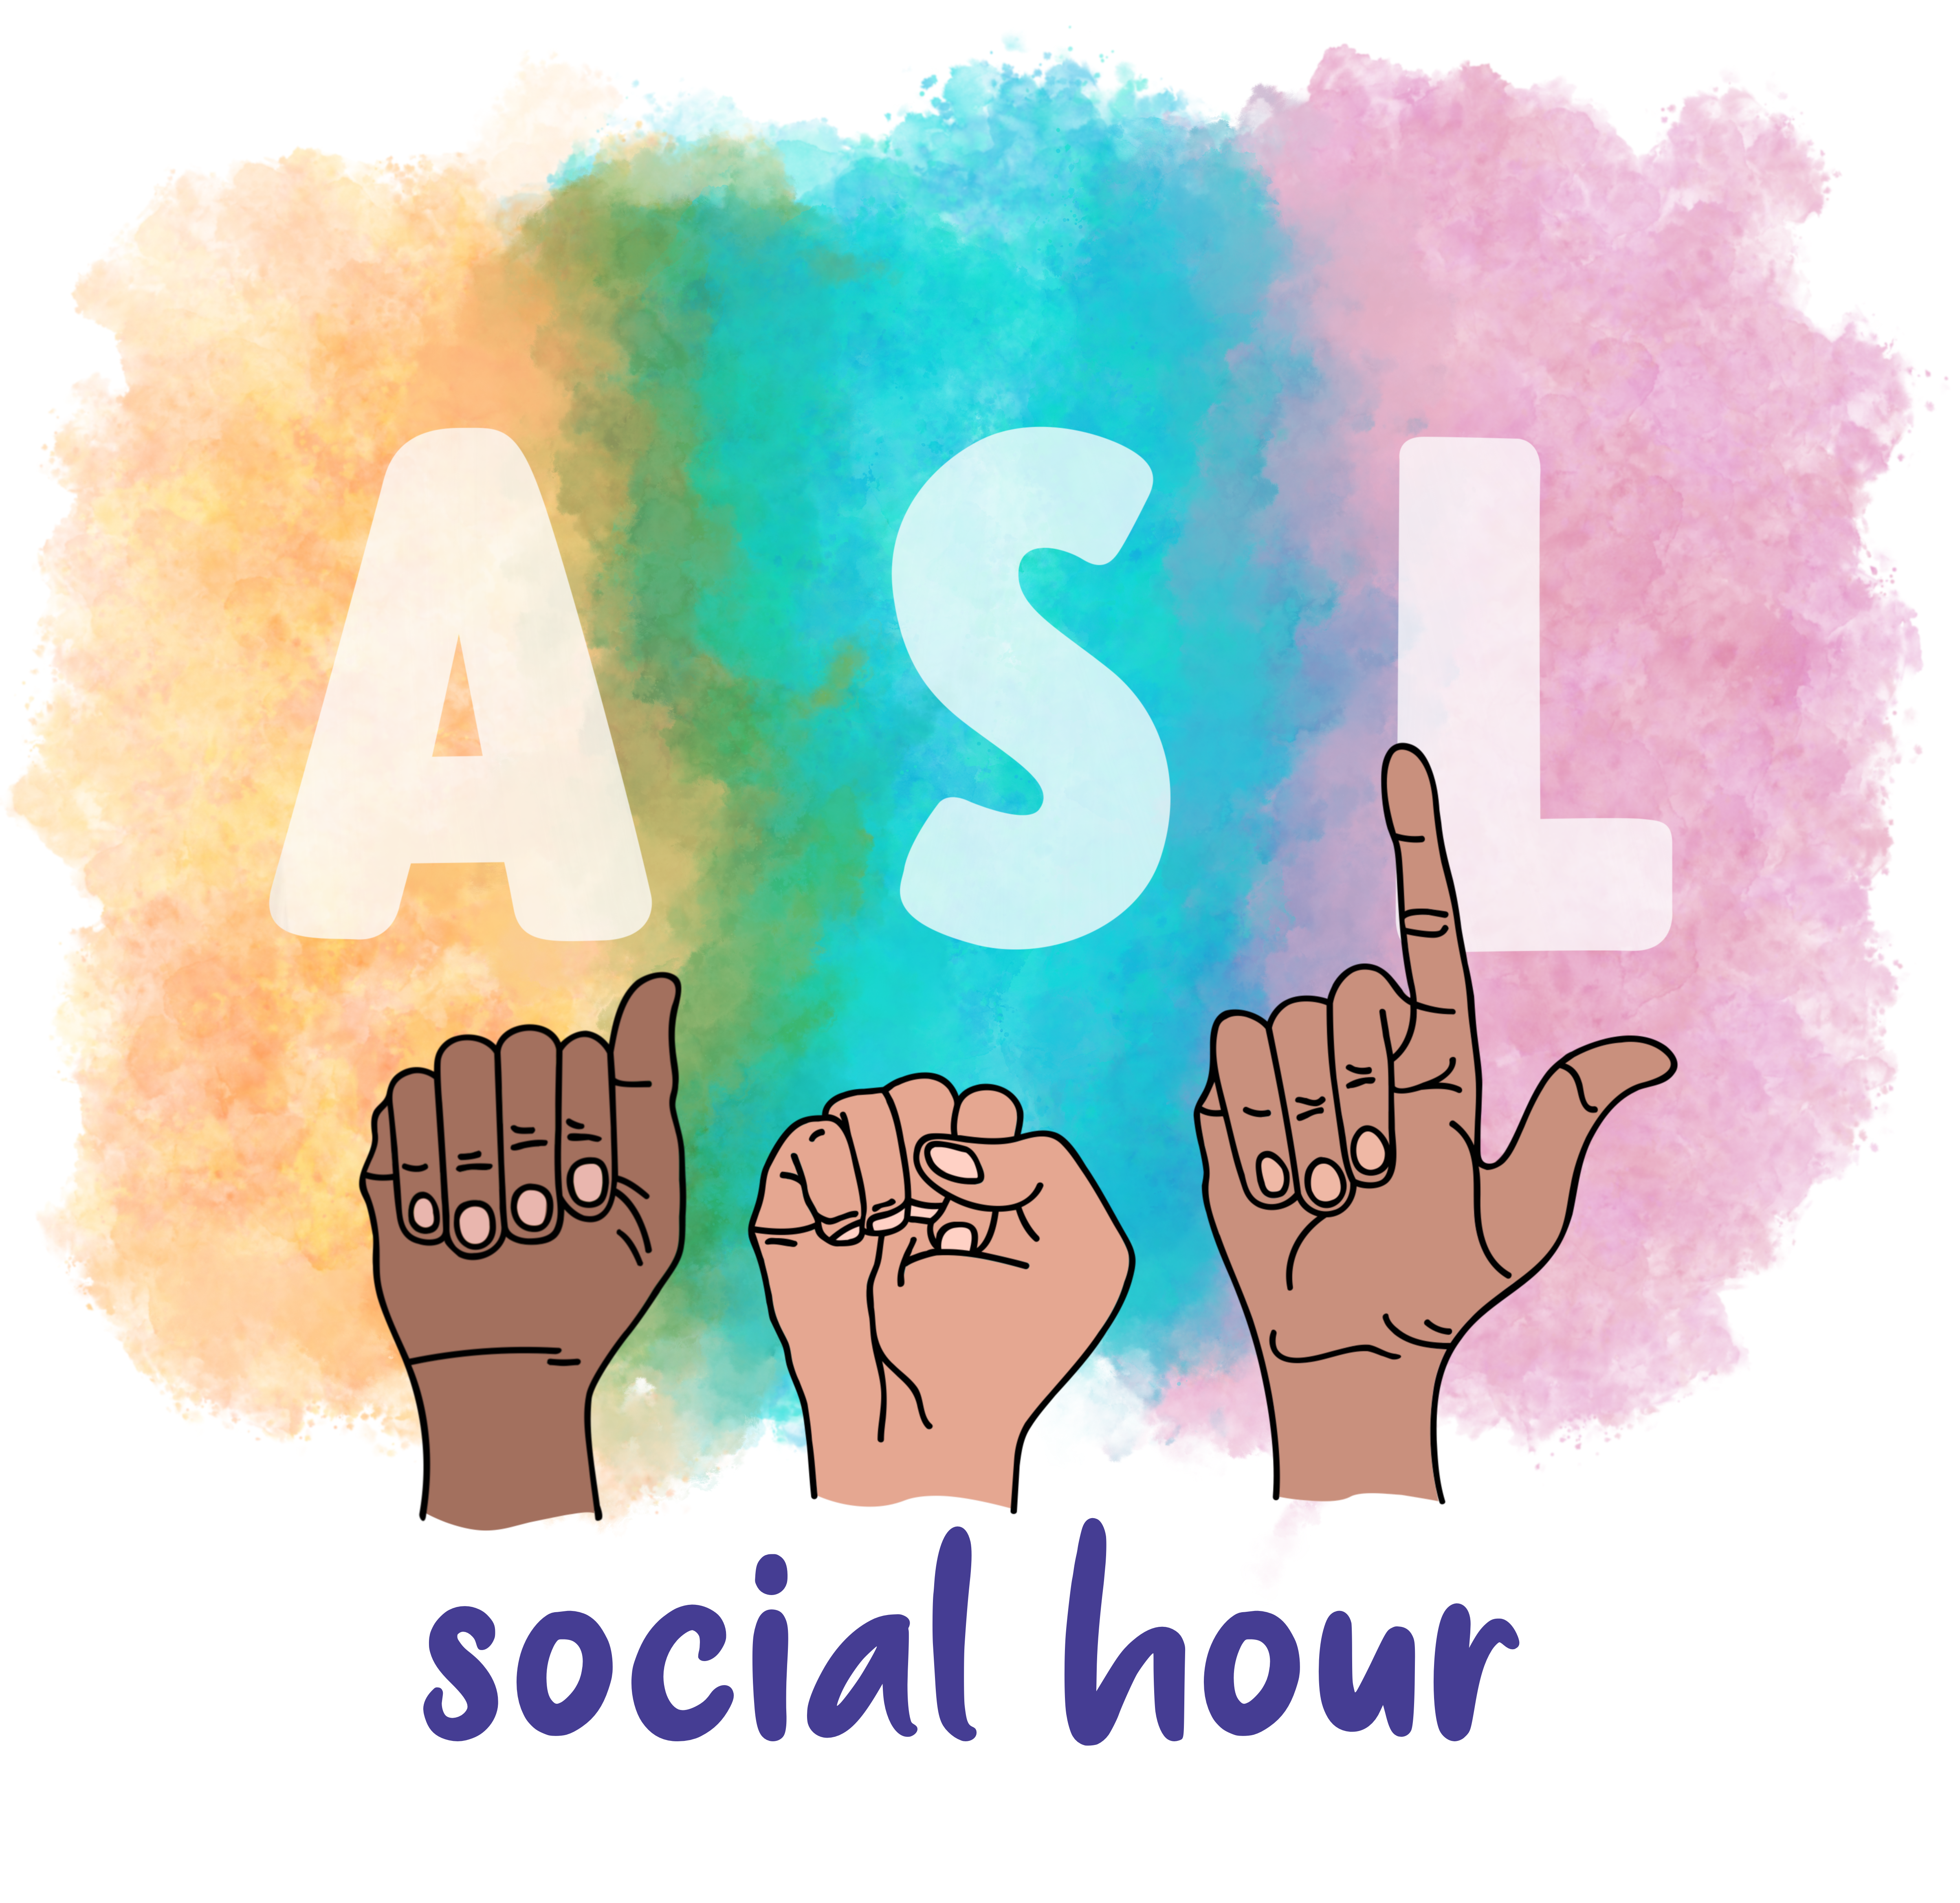 ASL hand signs with color backgrounds and social hour in type